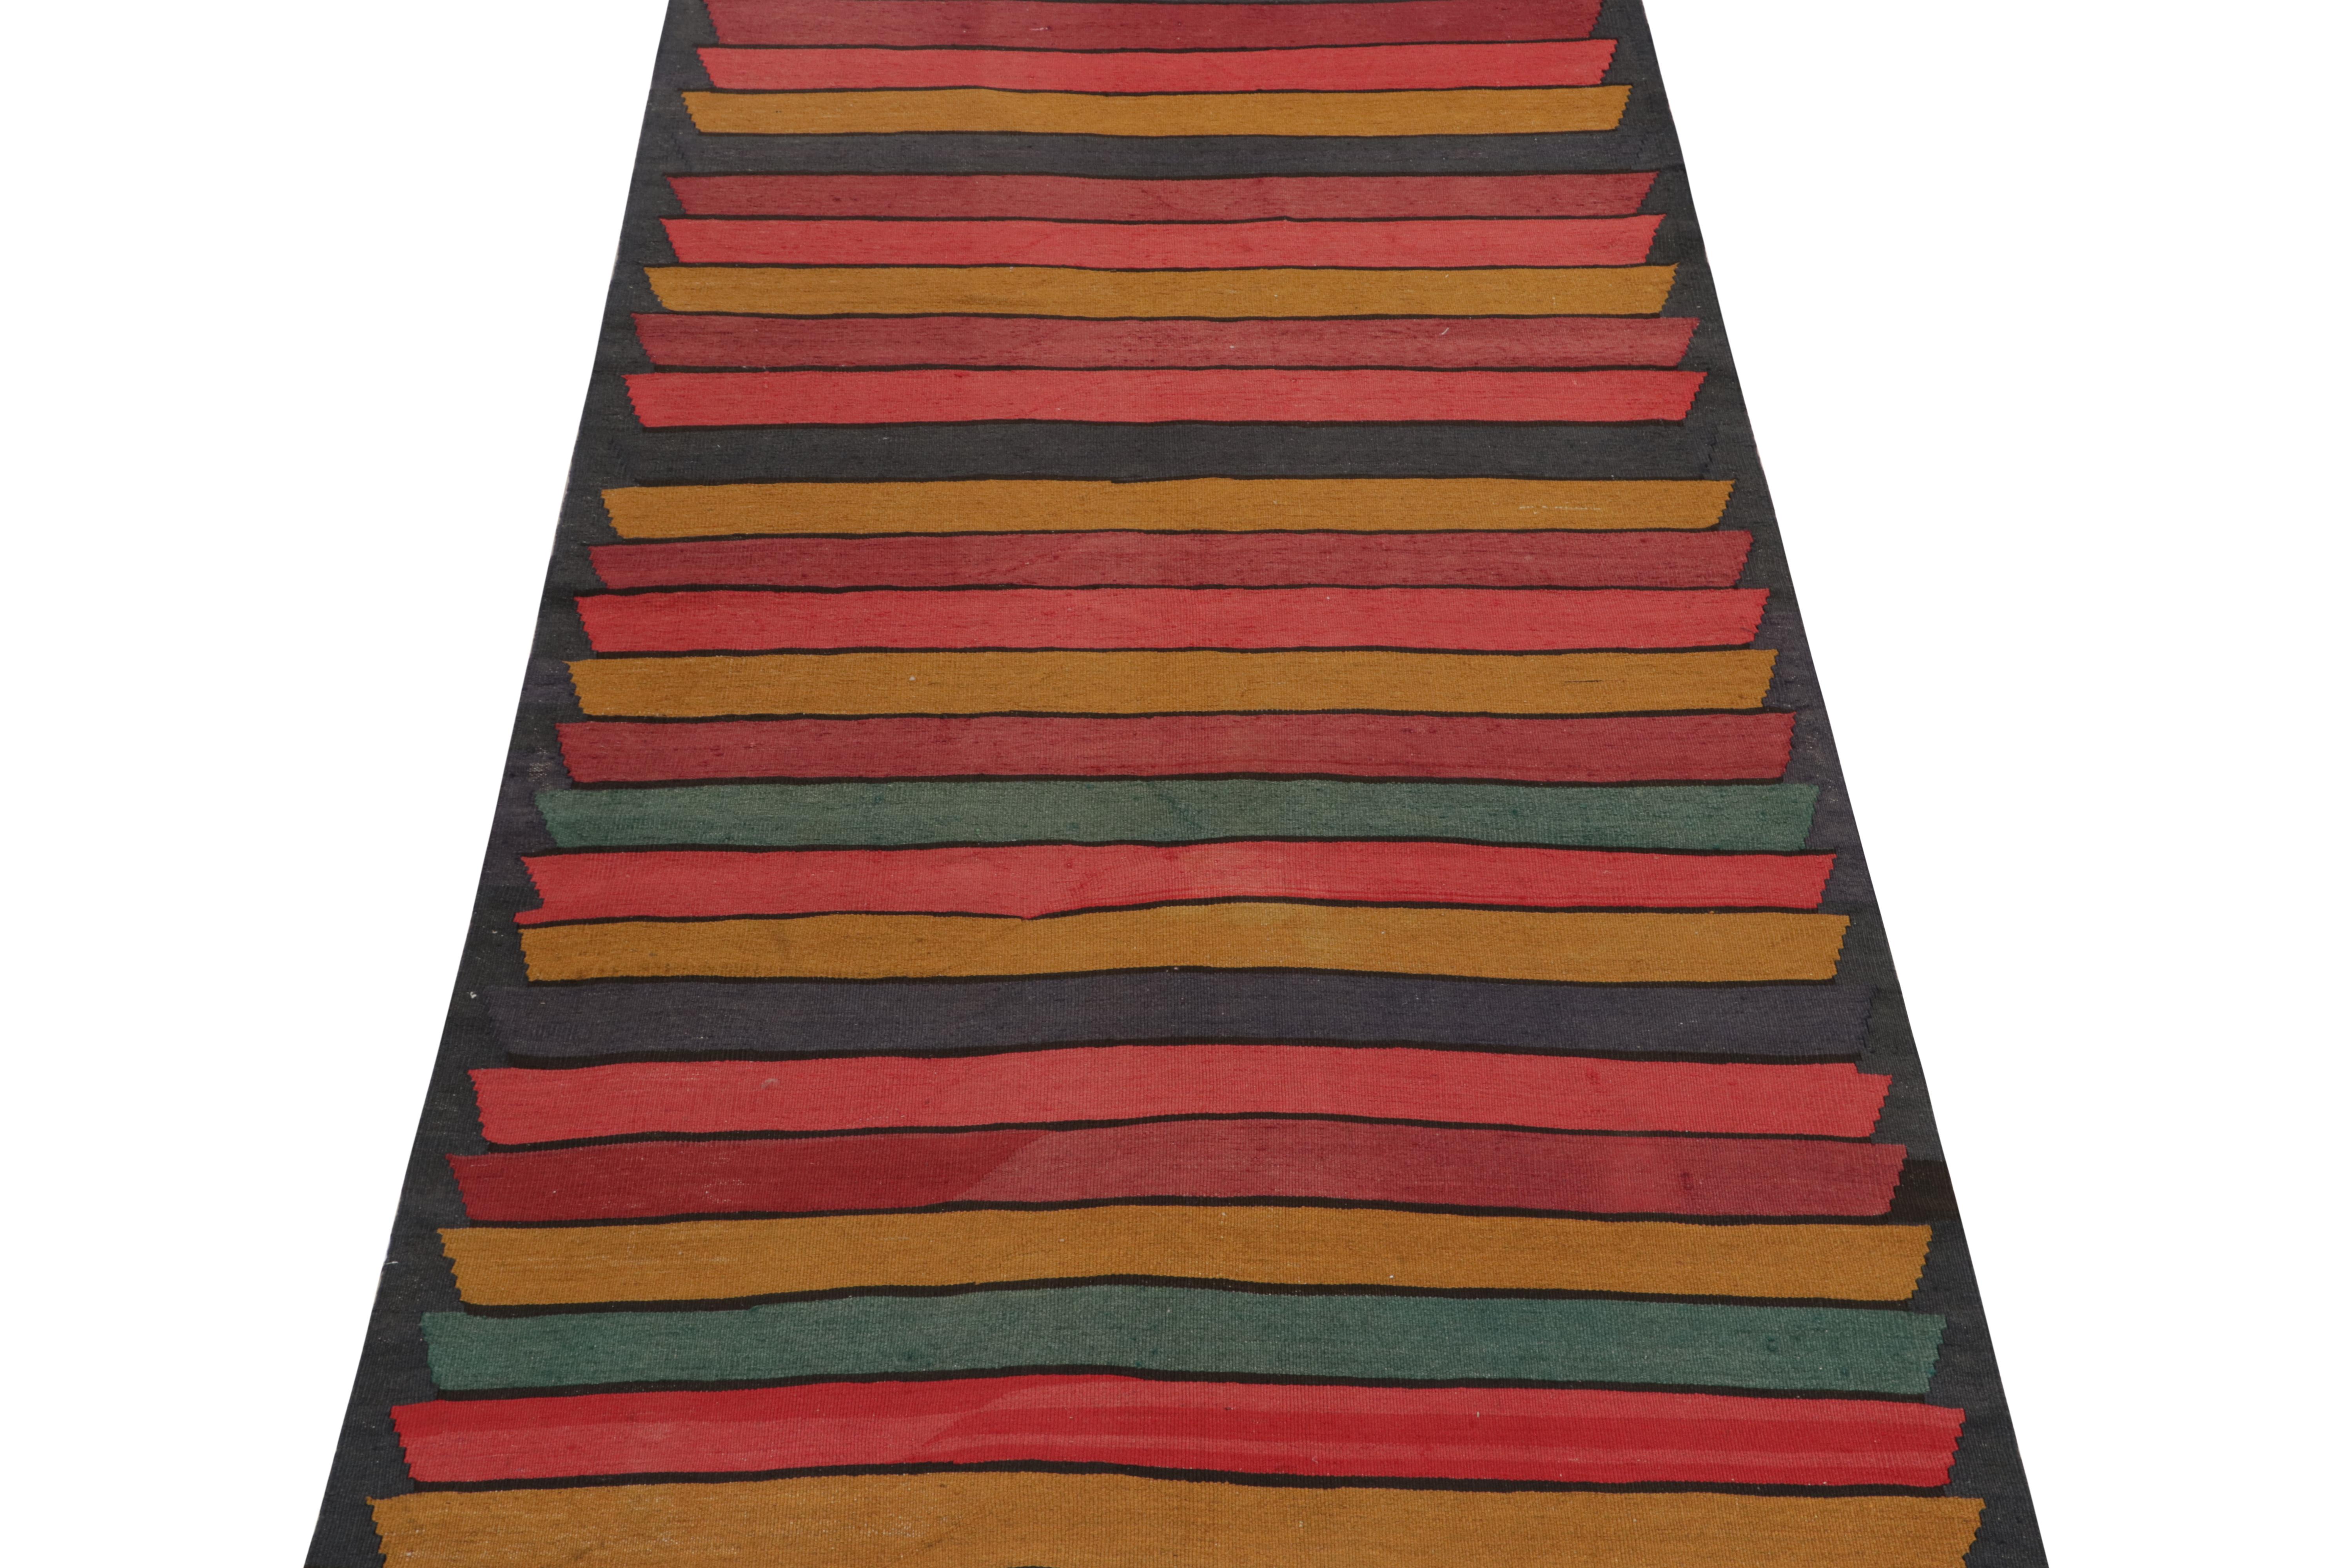 This vintage 5x10 Persian Kilim is a tribal rug from Meshkin—a small northwestern village known for its fabulous works. Handwoven in wool, it originates circa 1950-1960.

Further on the Design:

The bold design prefers polychromatic stripes and a